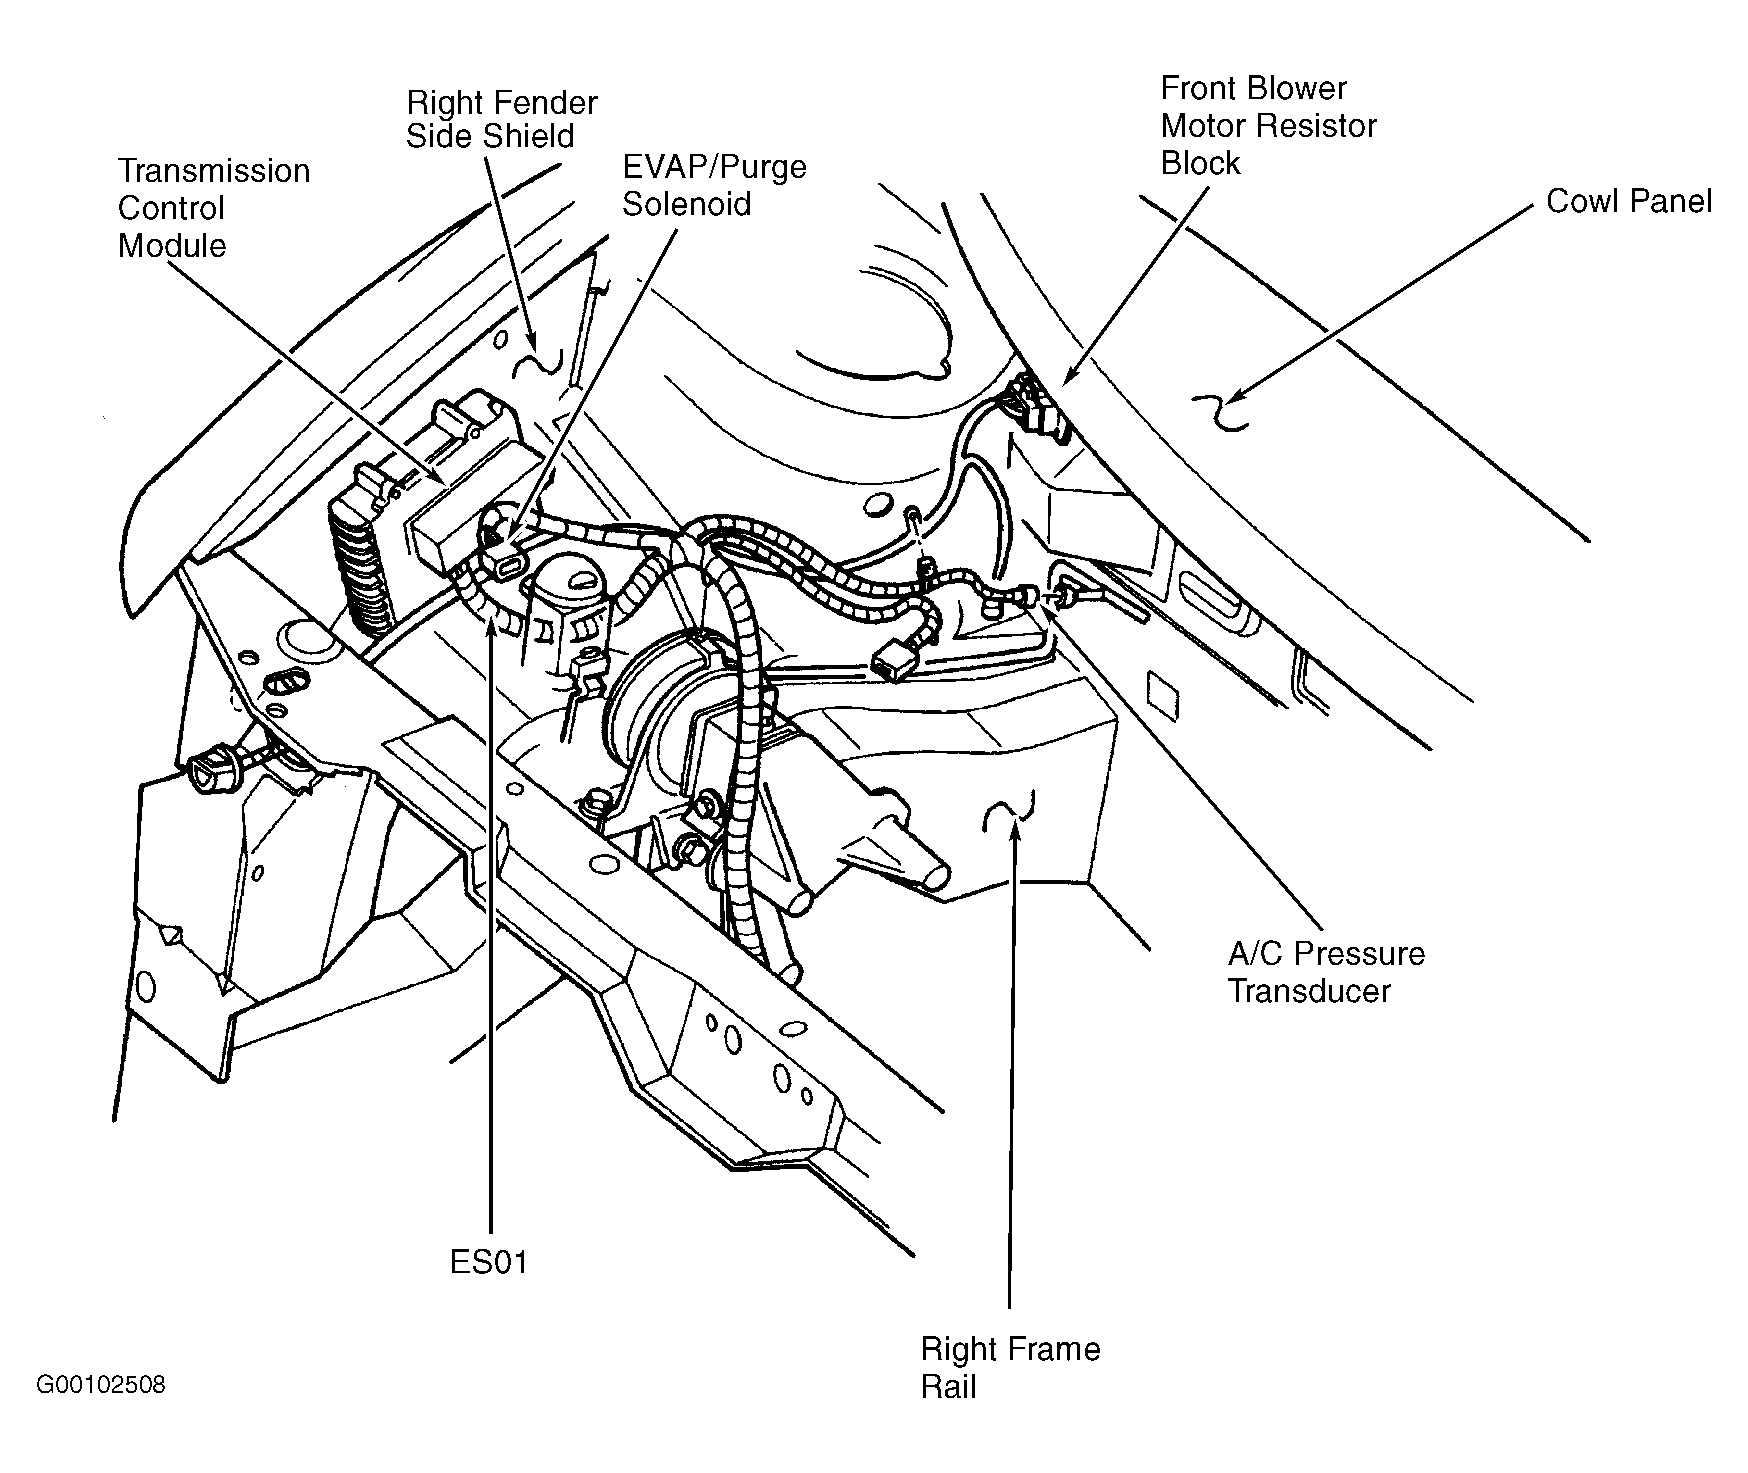 Dodge Caravan SE 1998 - Component Locations -  Right Side Of Engine Compartment